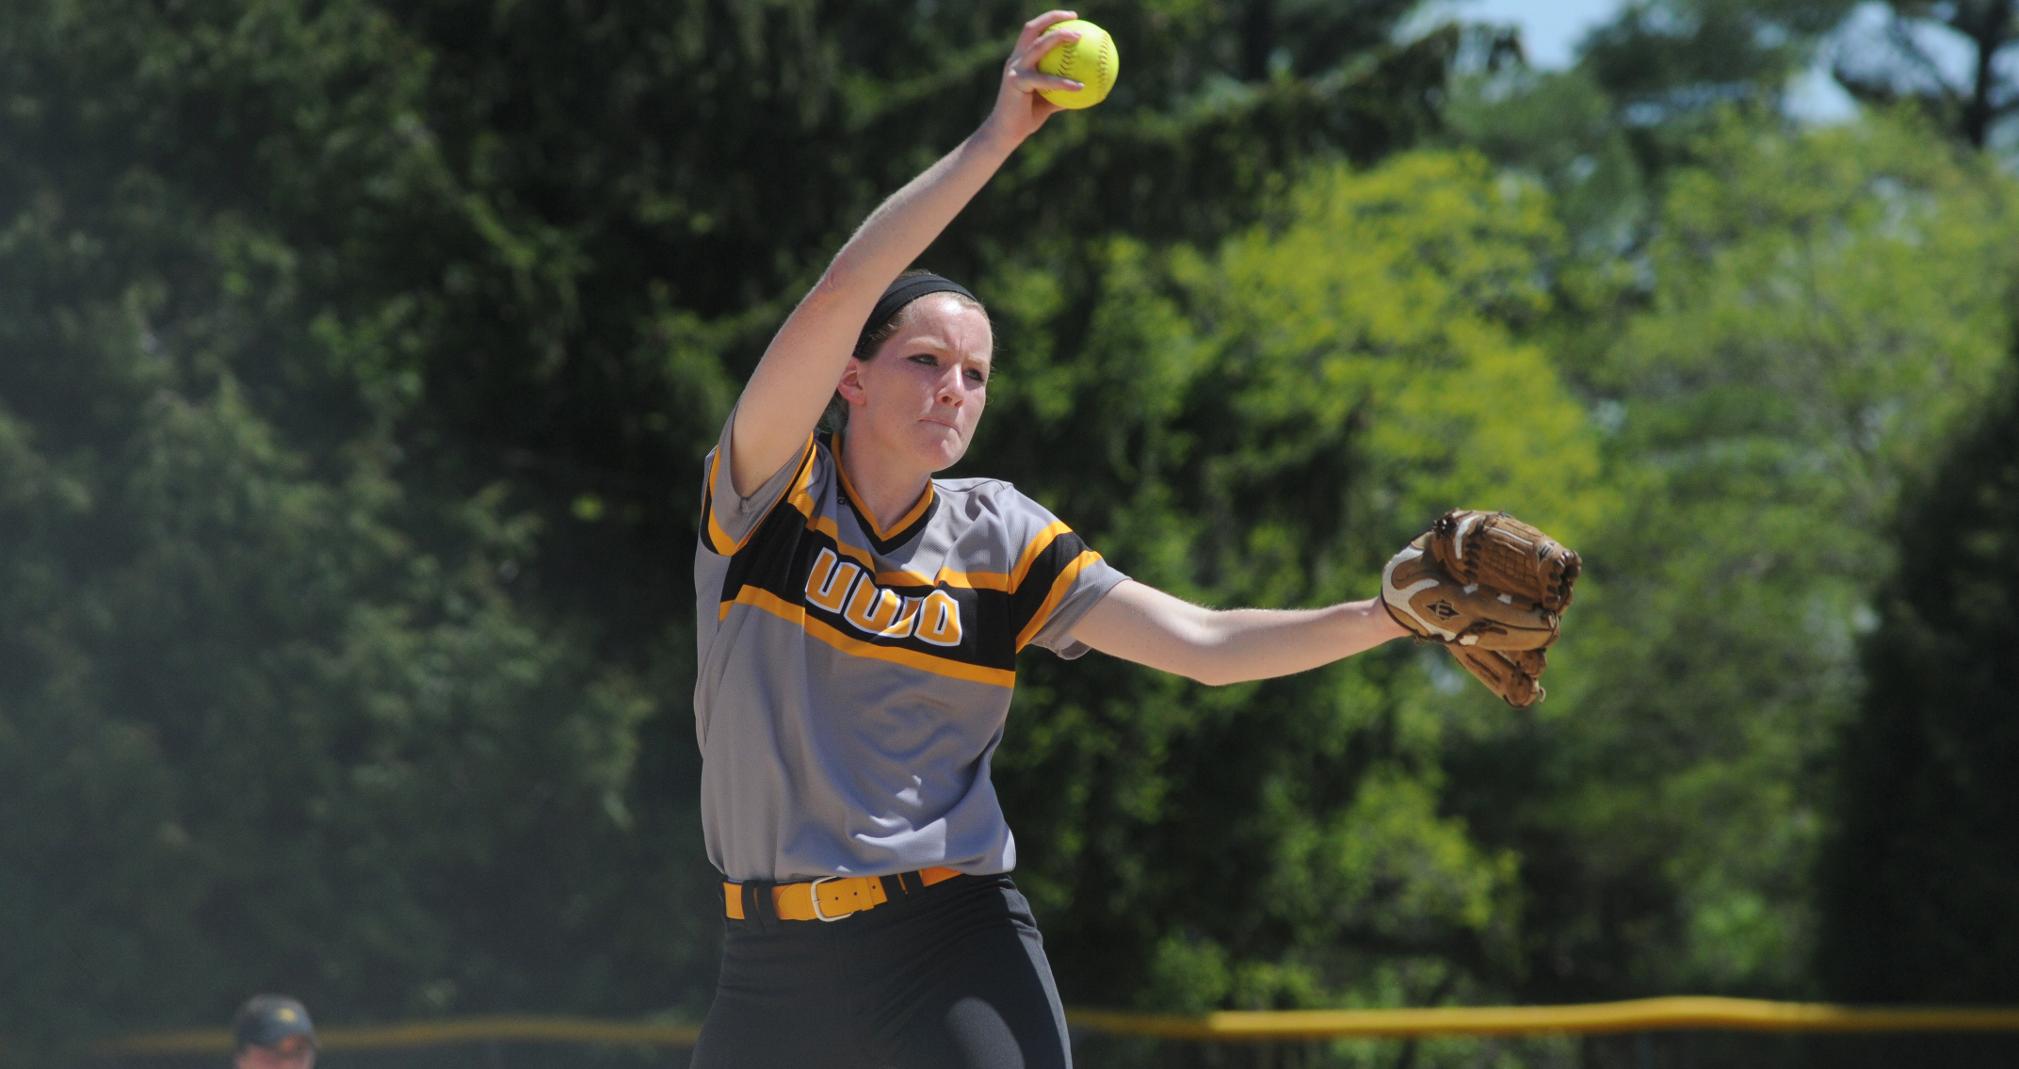 Sara Brunlieb suffered the complete-game loss, allowing an unearned run with 10 hits and four strikeouts.